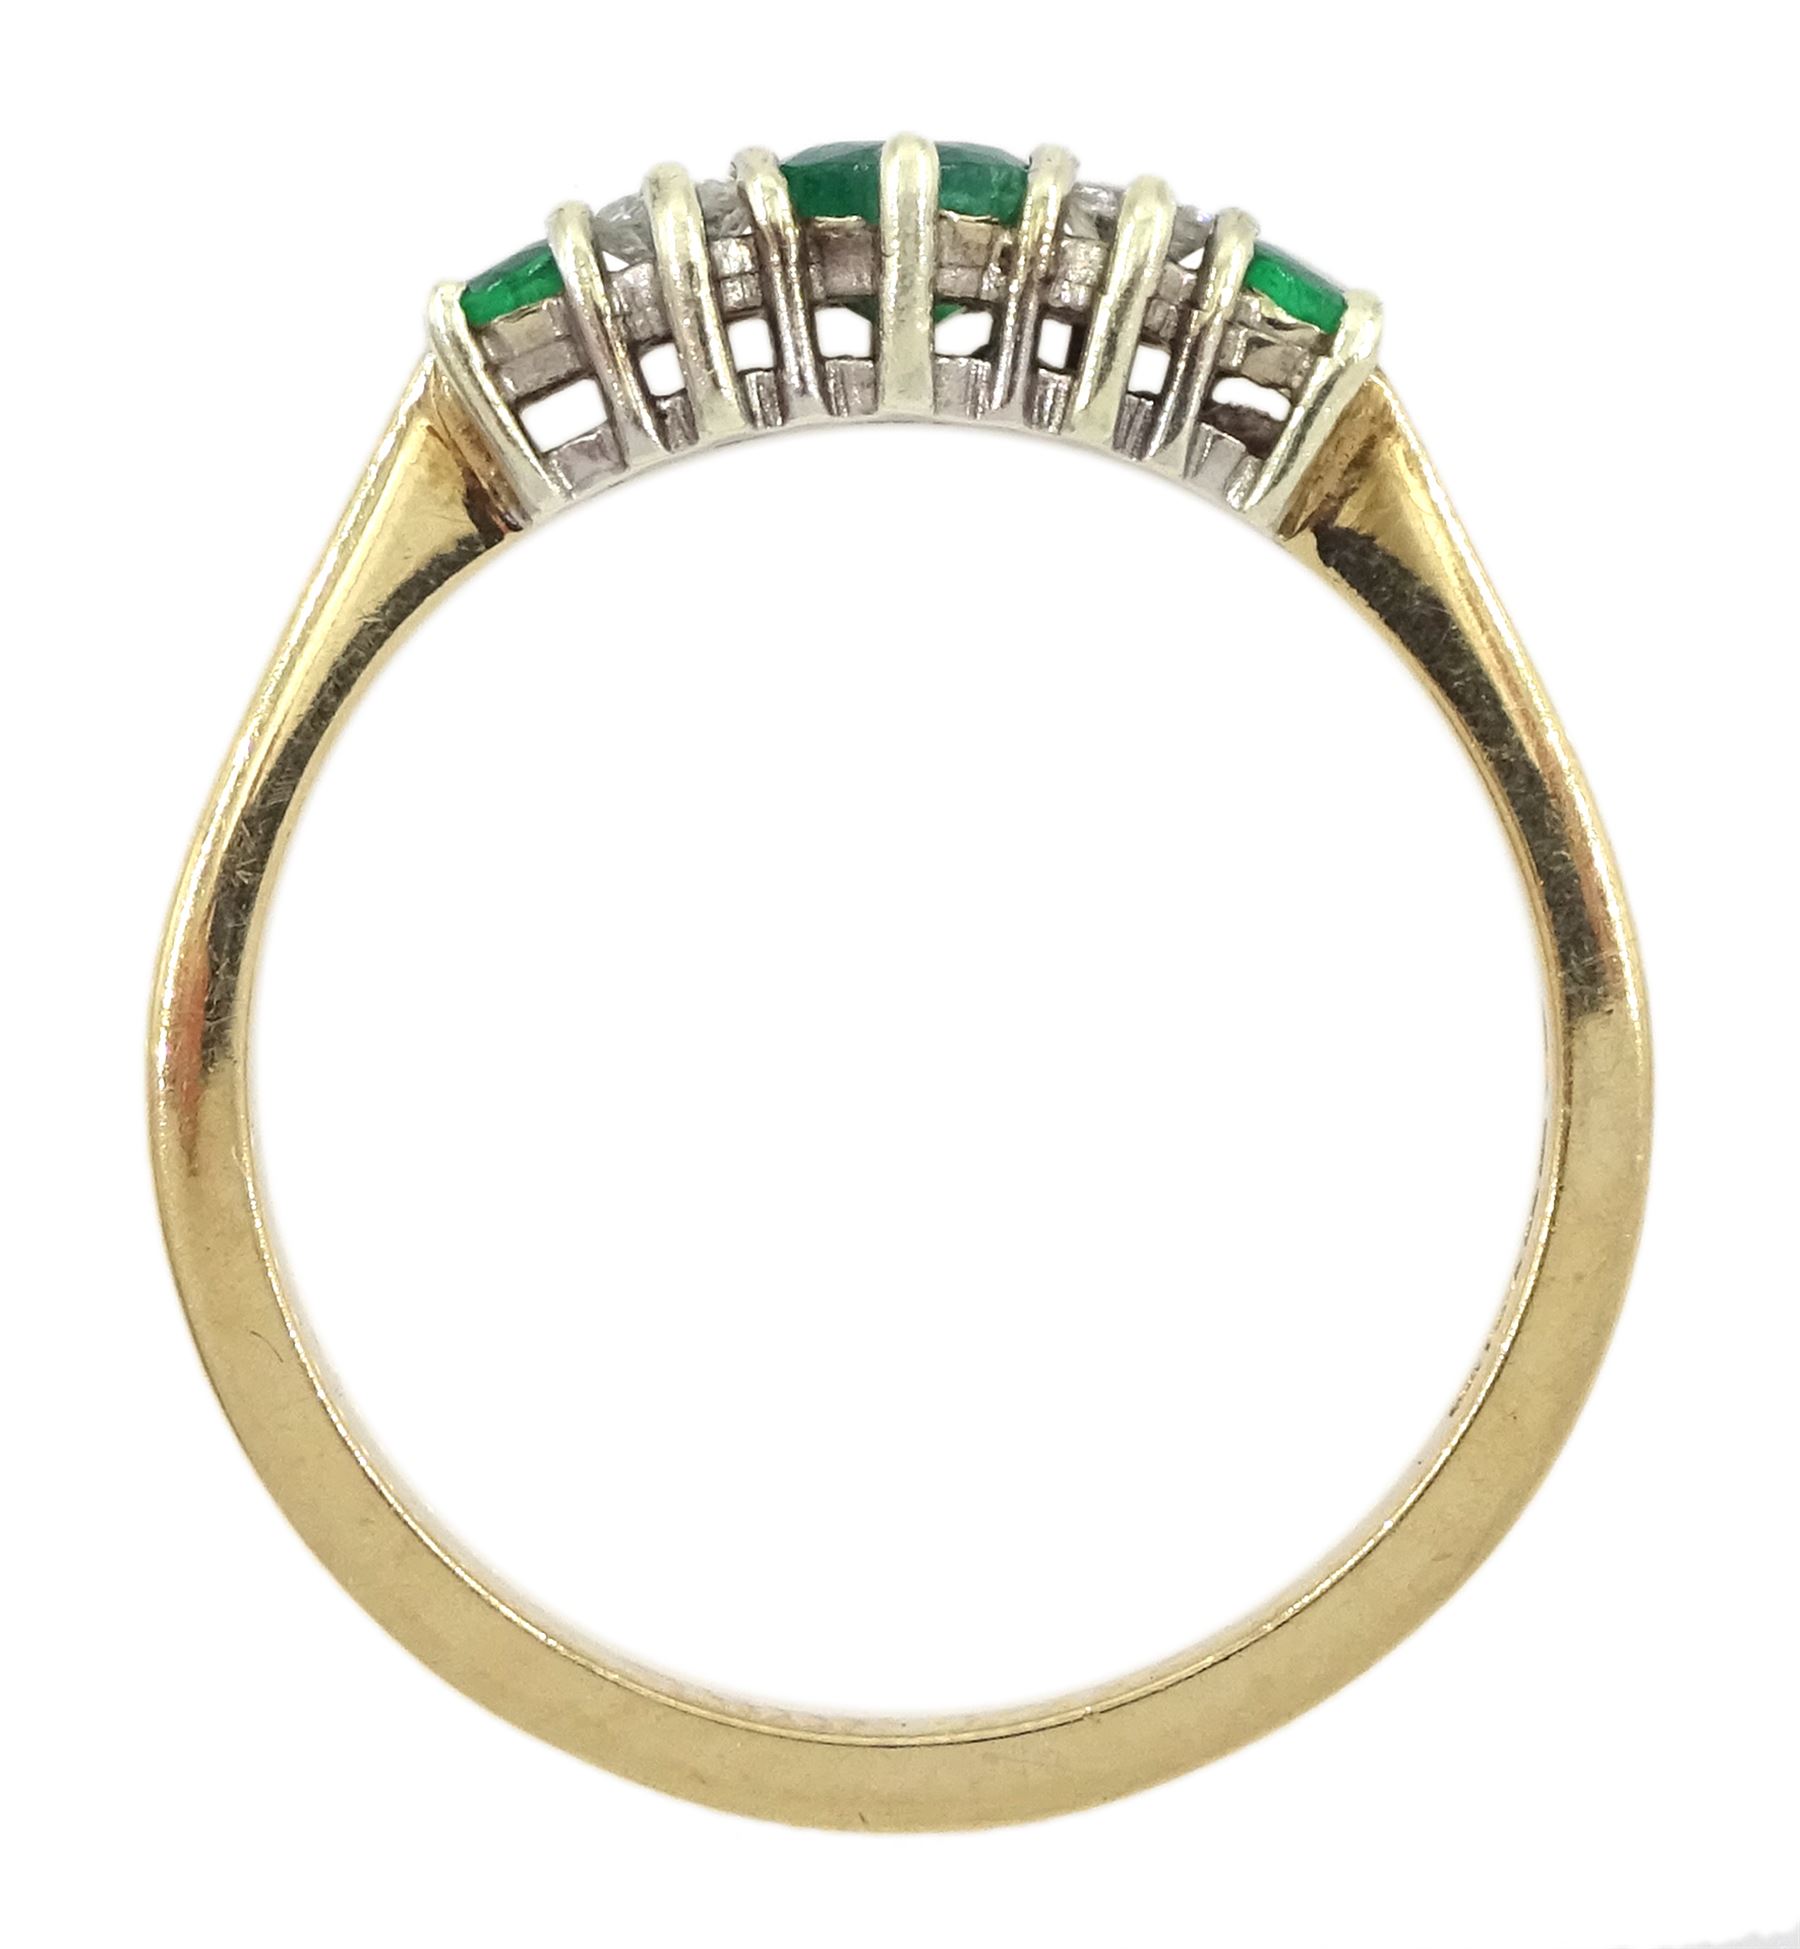 9ct gold five stone round emerald and diamond ring - Image 4 of 4